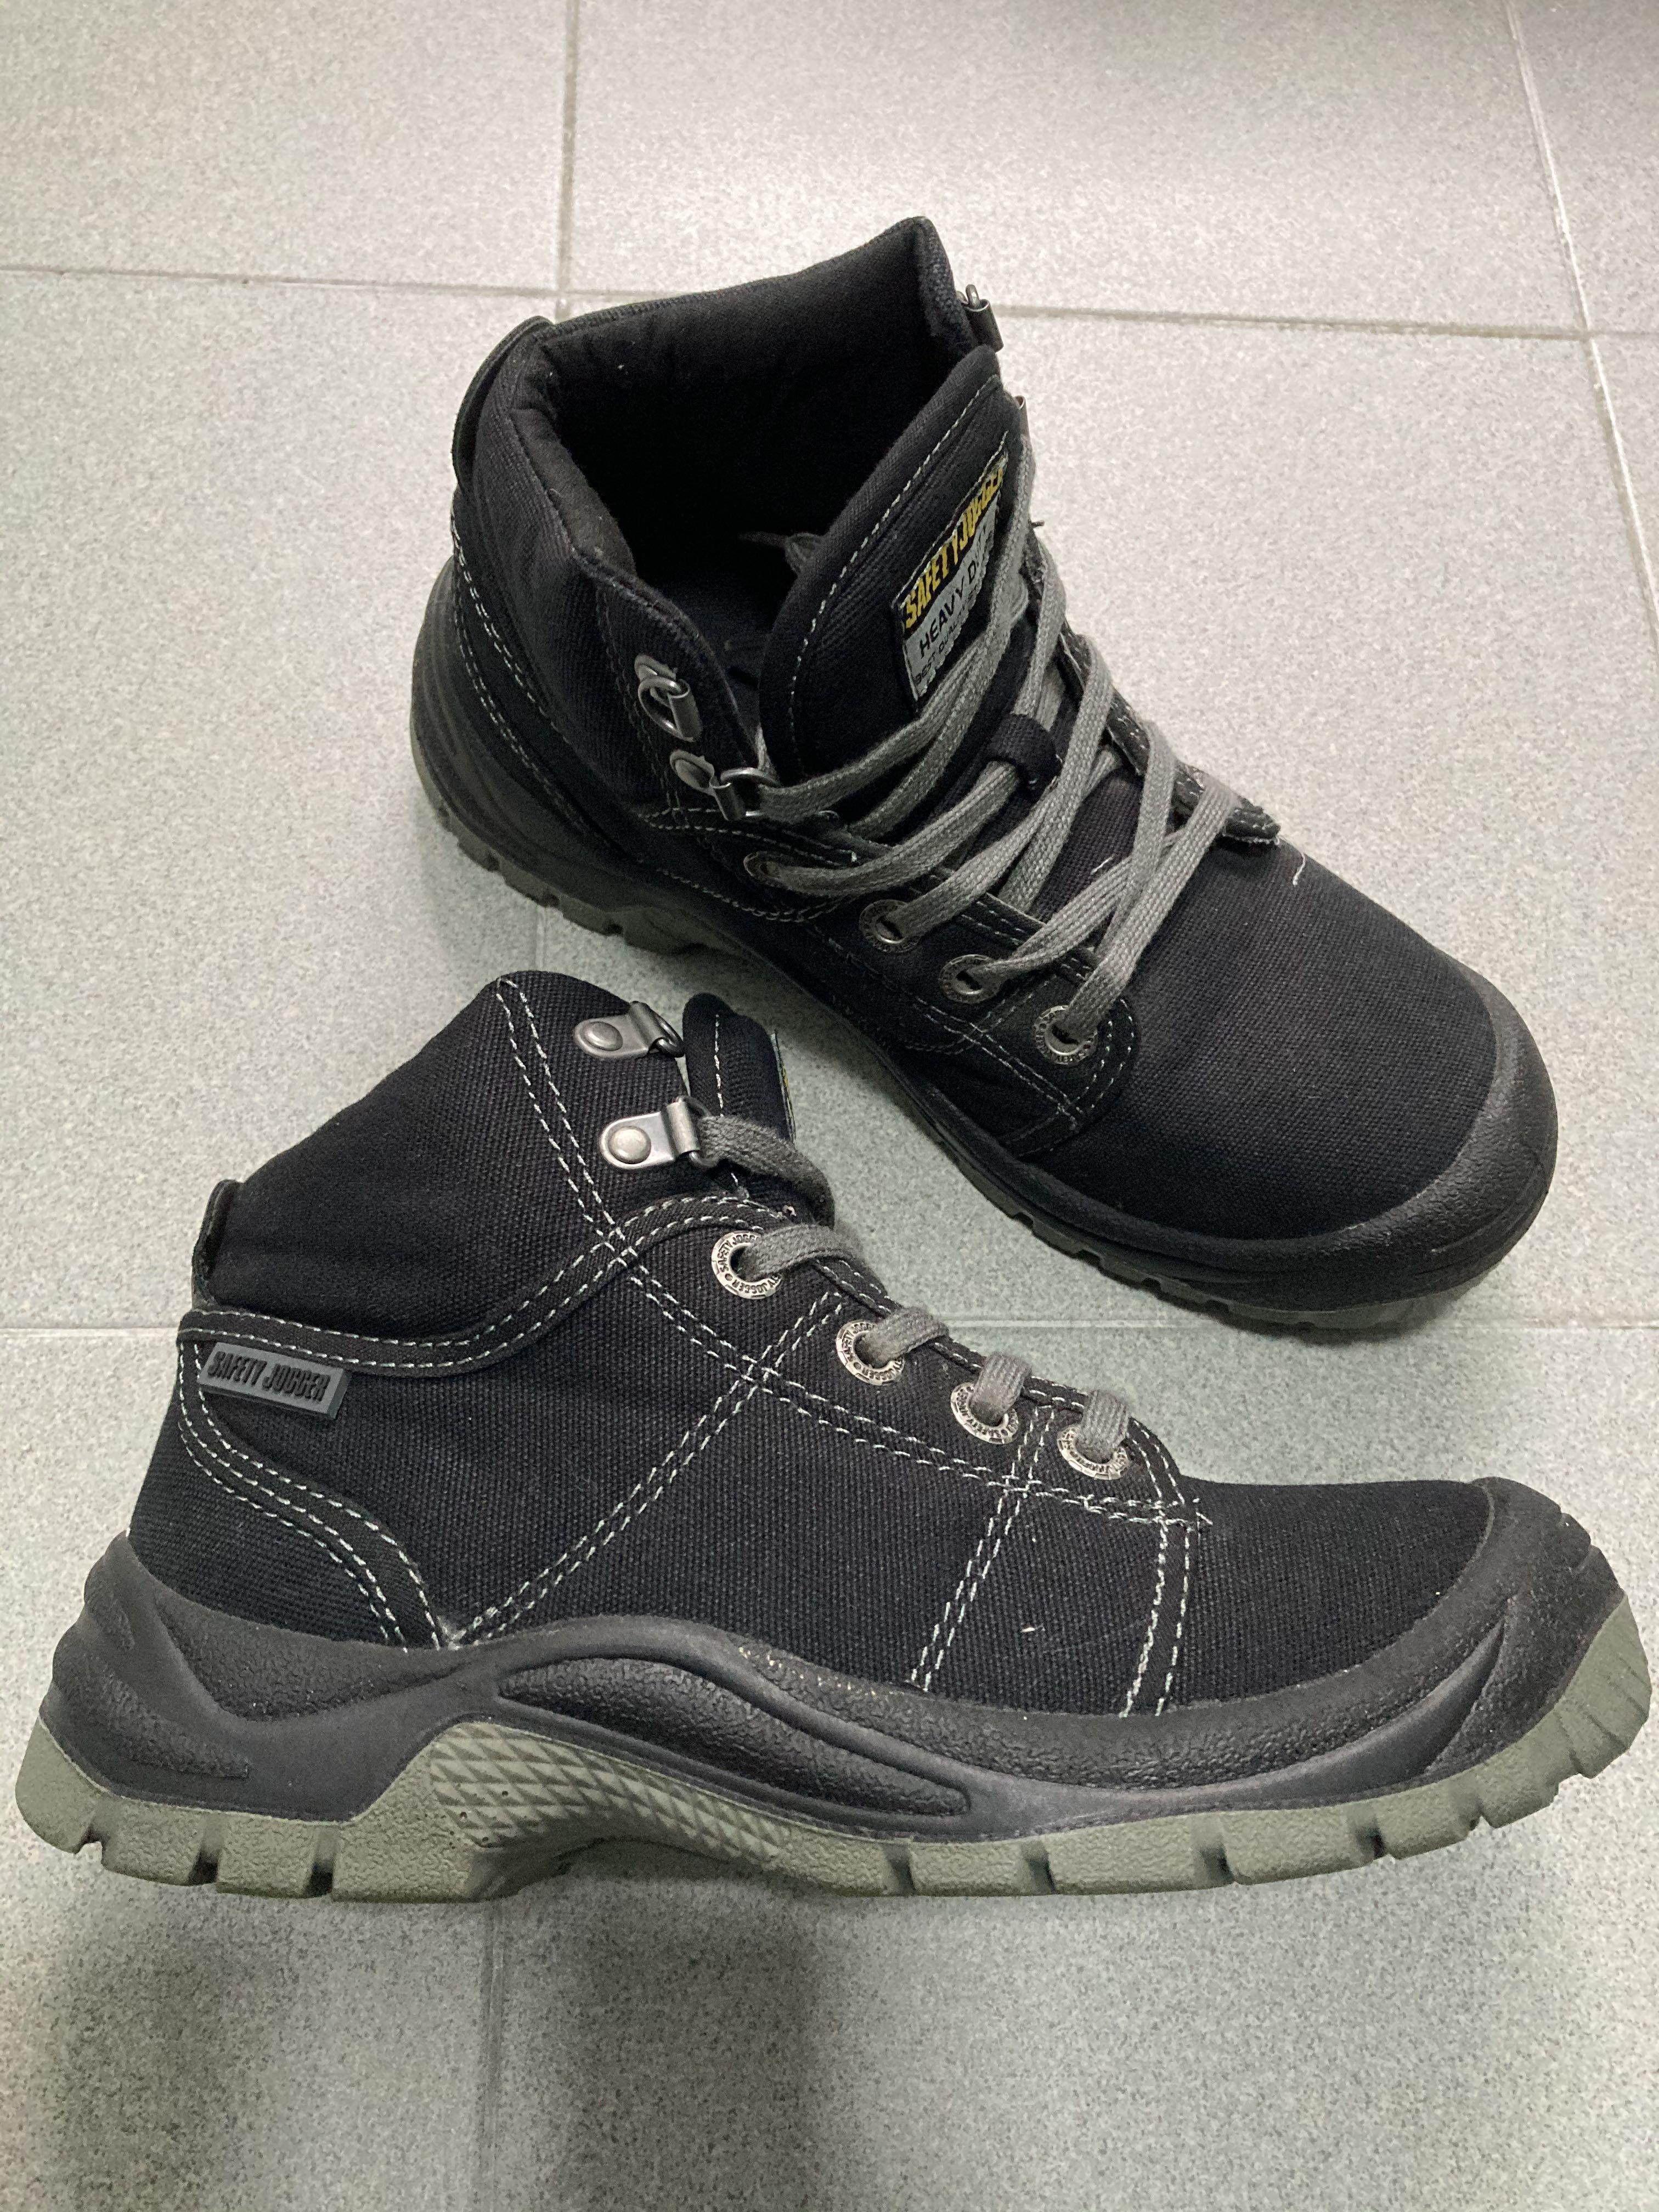 where to buy safety shoes near me